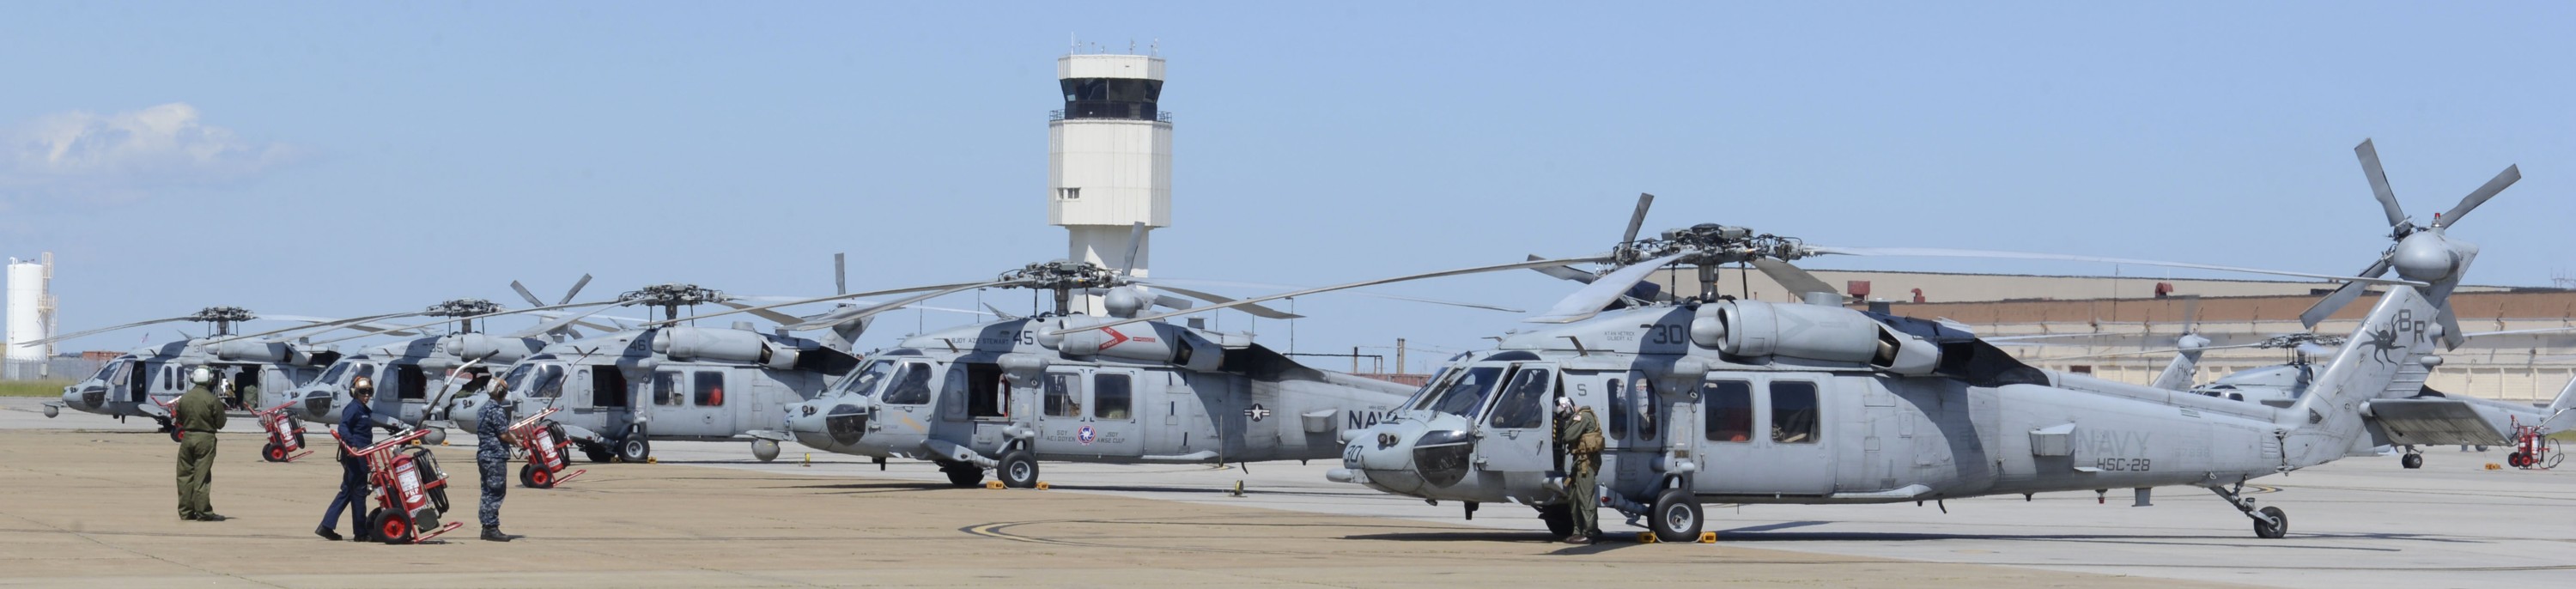 hsc-28 dragon whales helicopter sea combat squadron mh-60s seahawk us navy 54 navsta norfolk virginia